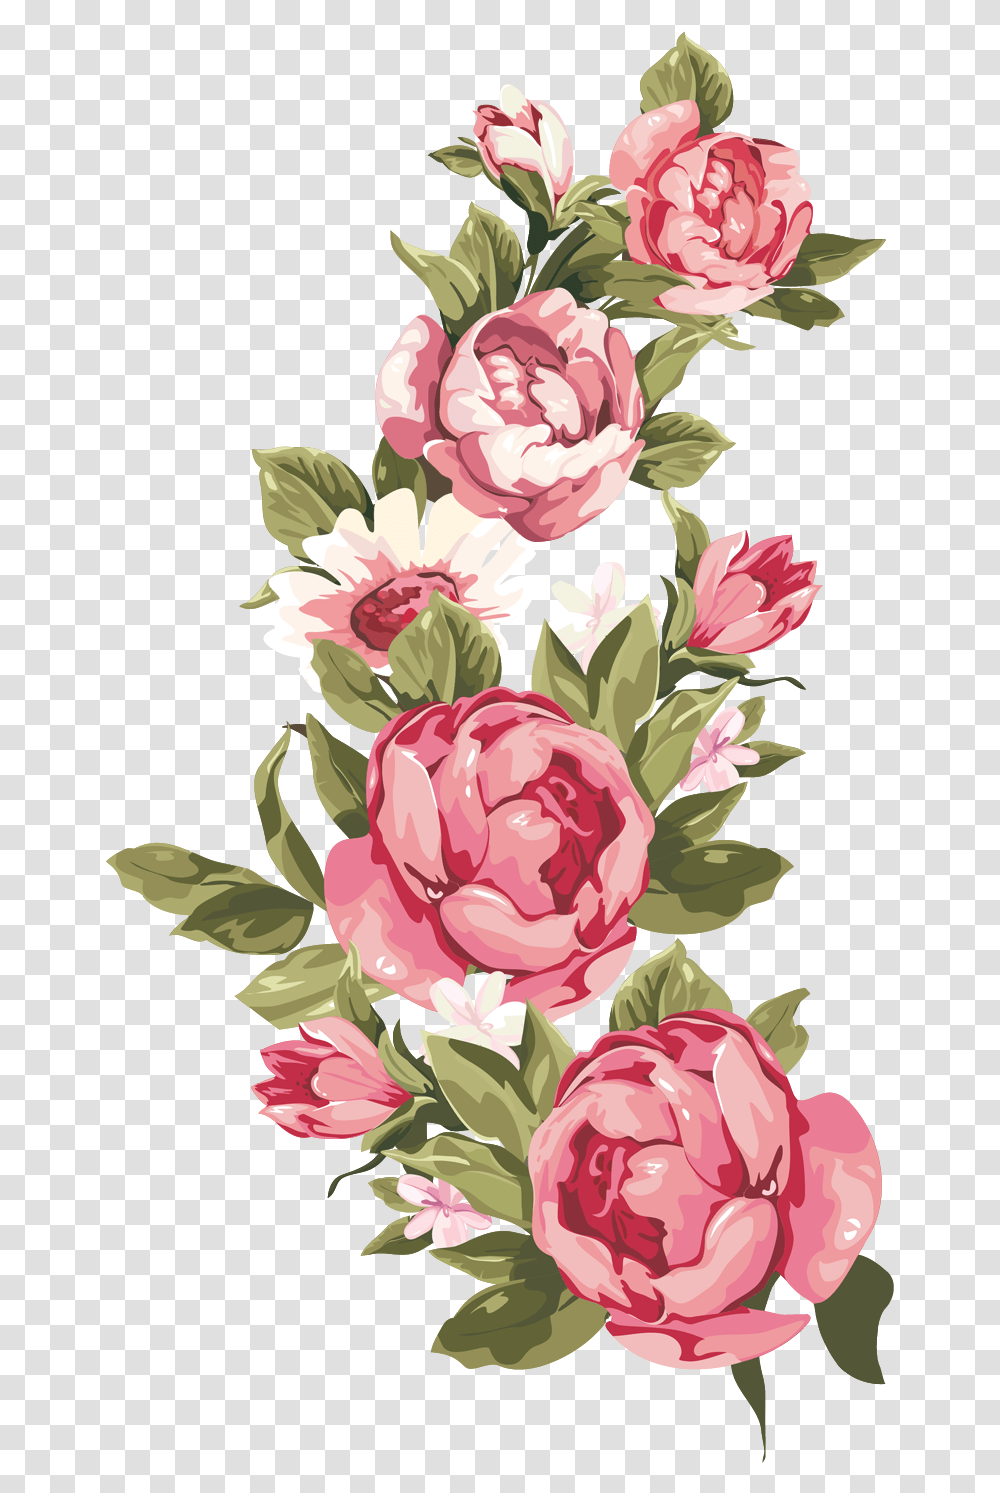 Library Of Peony Flower Free Vintage Text Box, Plant, Blossom, Rose, Carnation Transparent Png